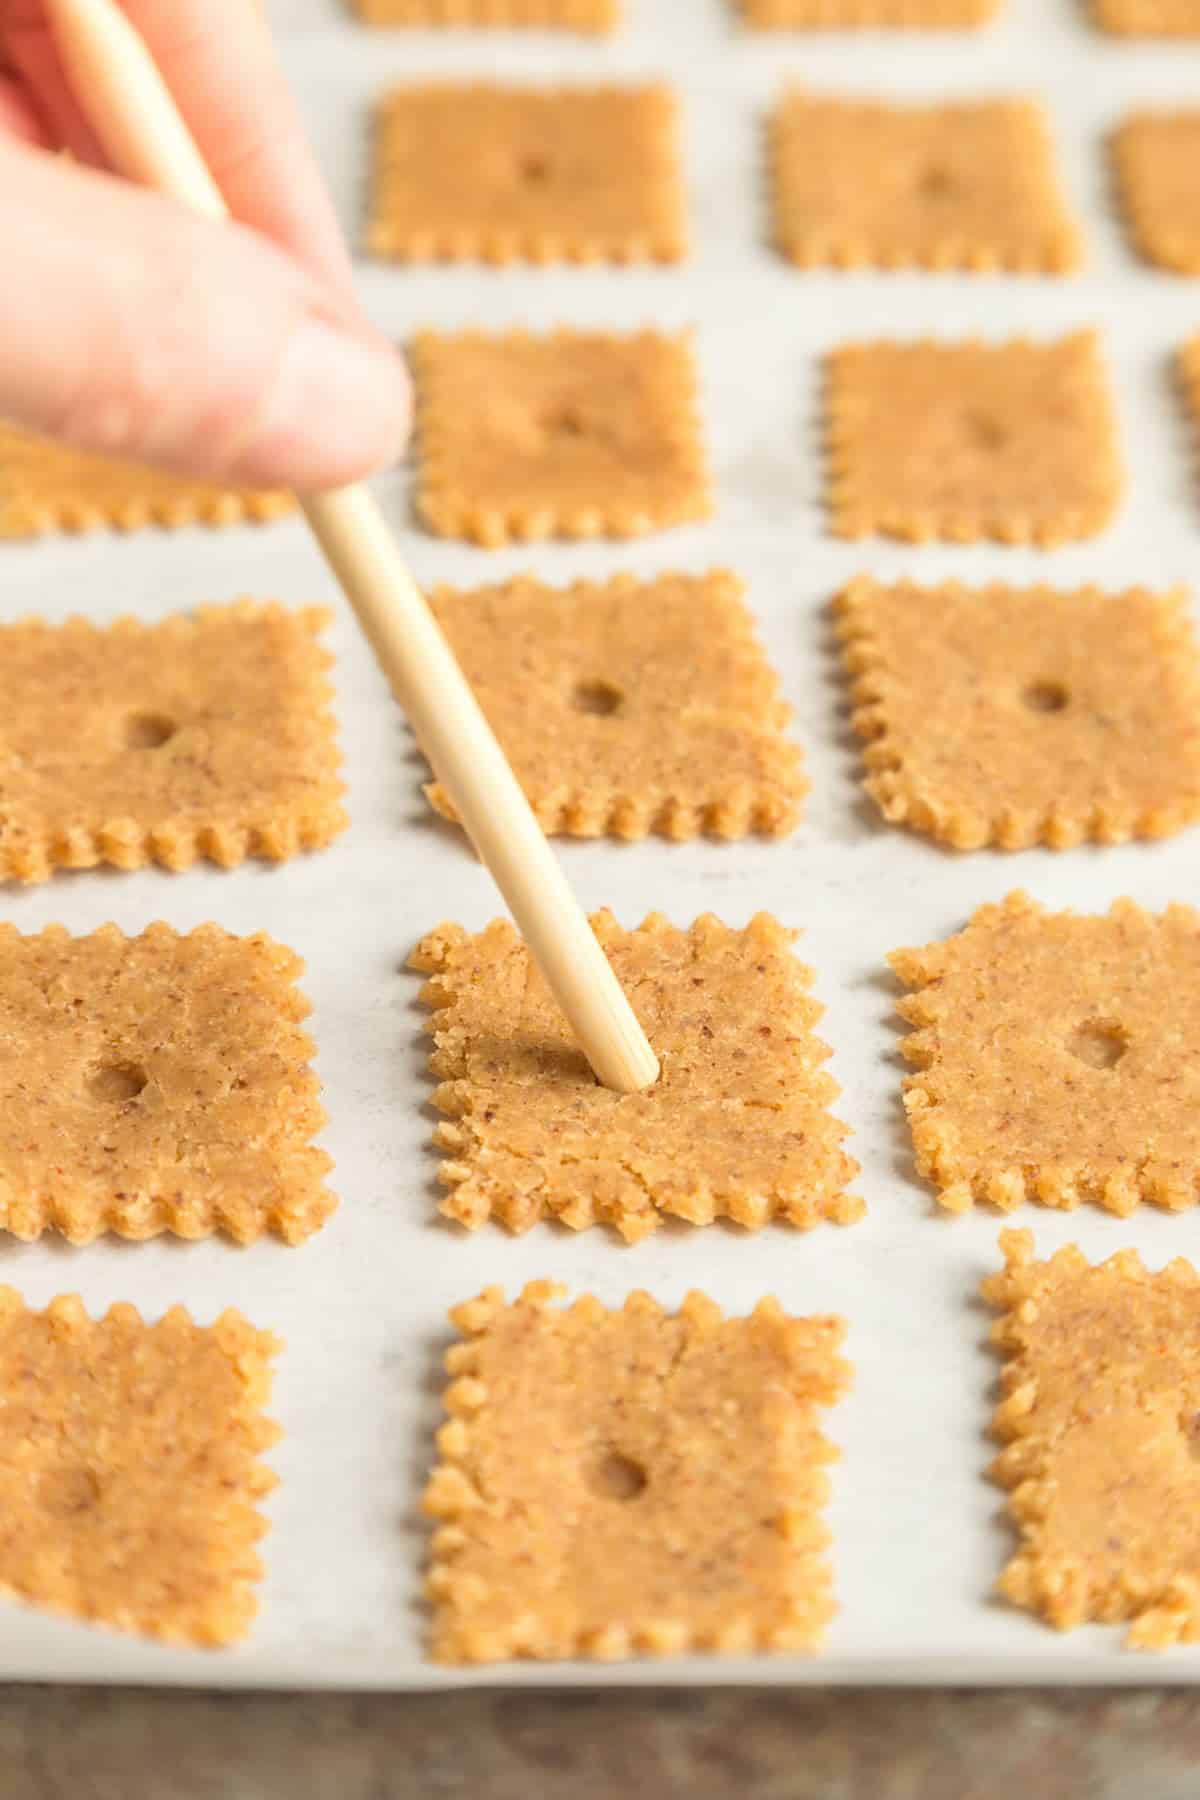 Almond flour dough scored into squares and placed on a baking sheet with parchment paper. A wooden stick is piercing a hole into each cracker.